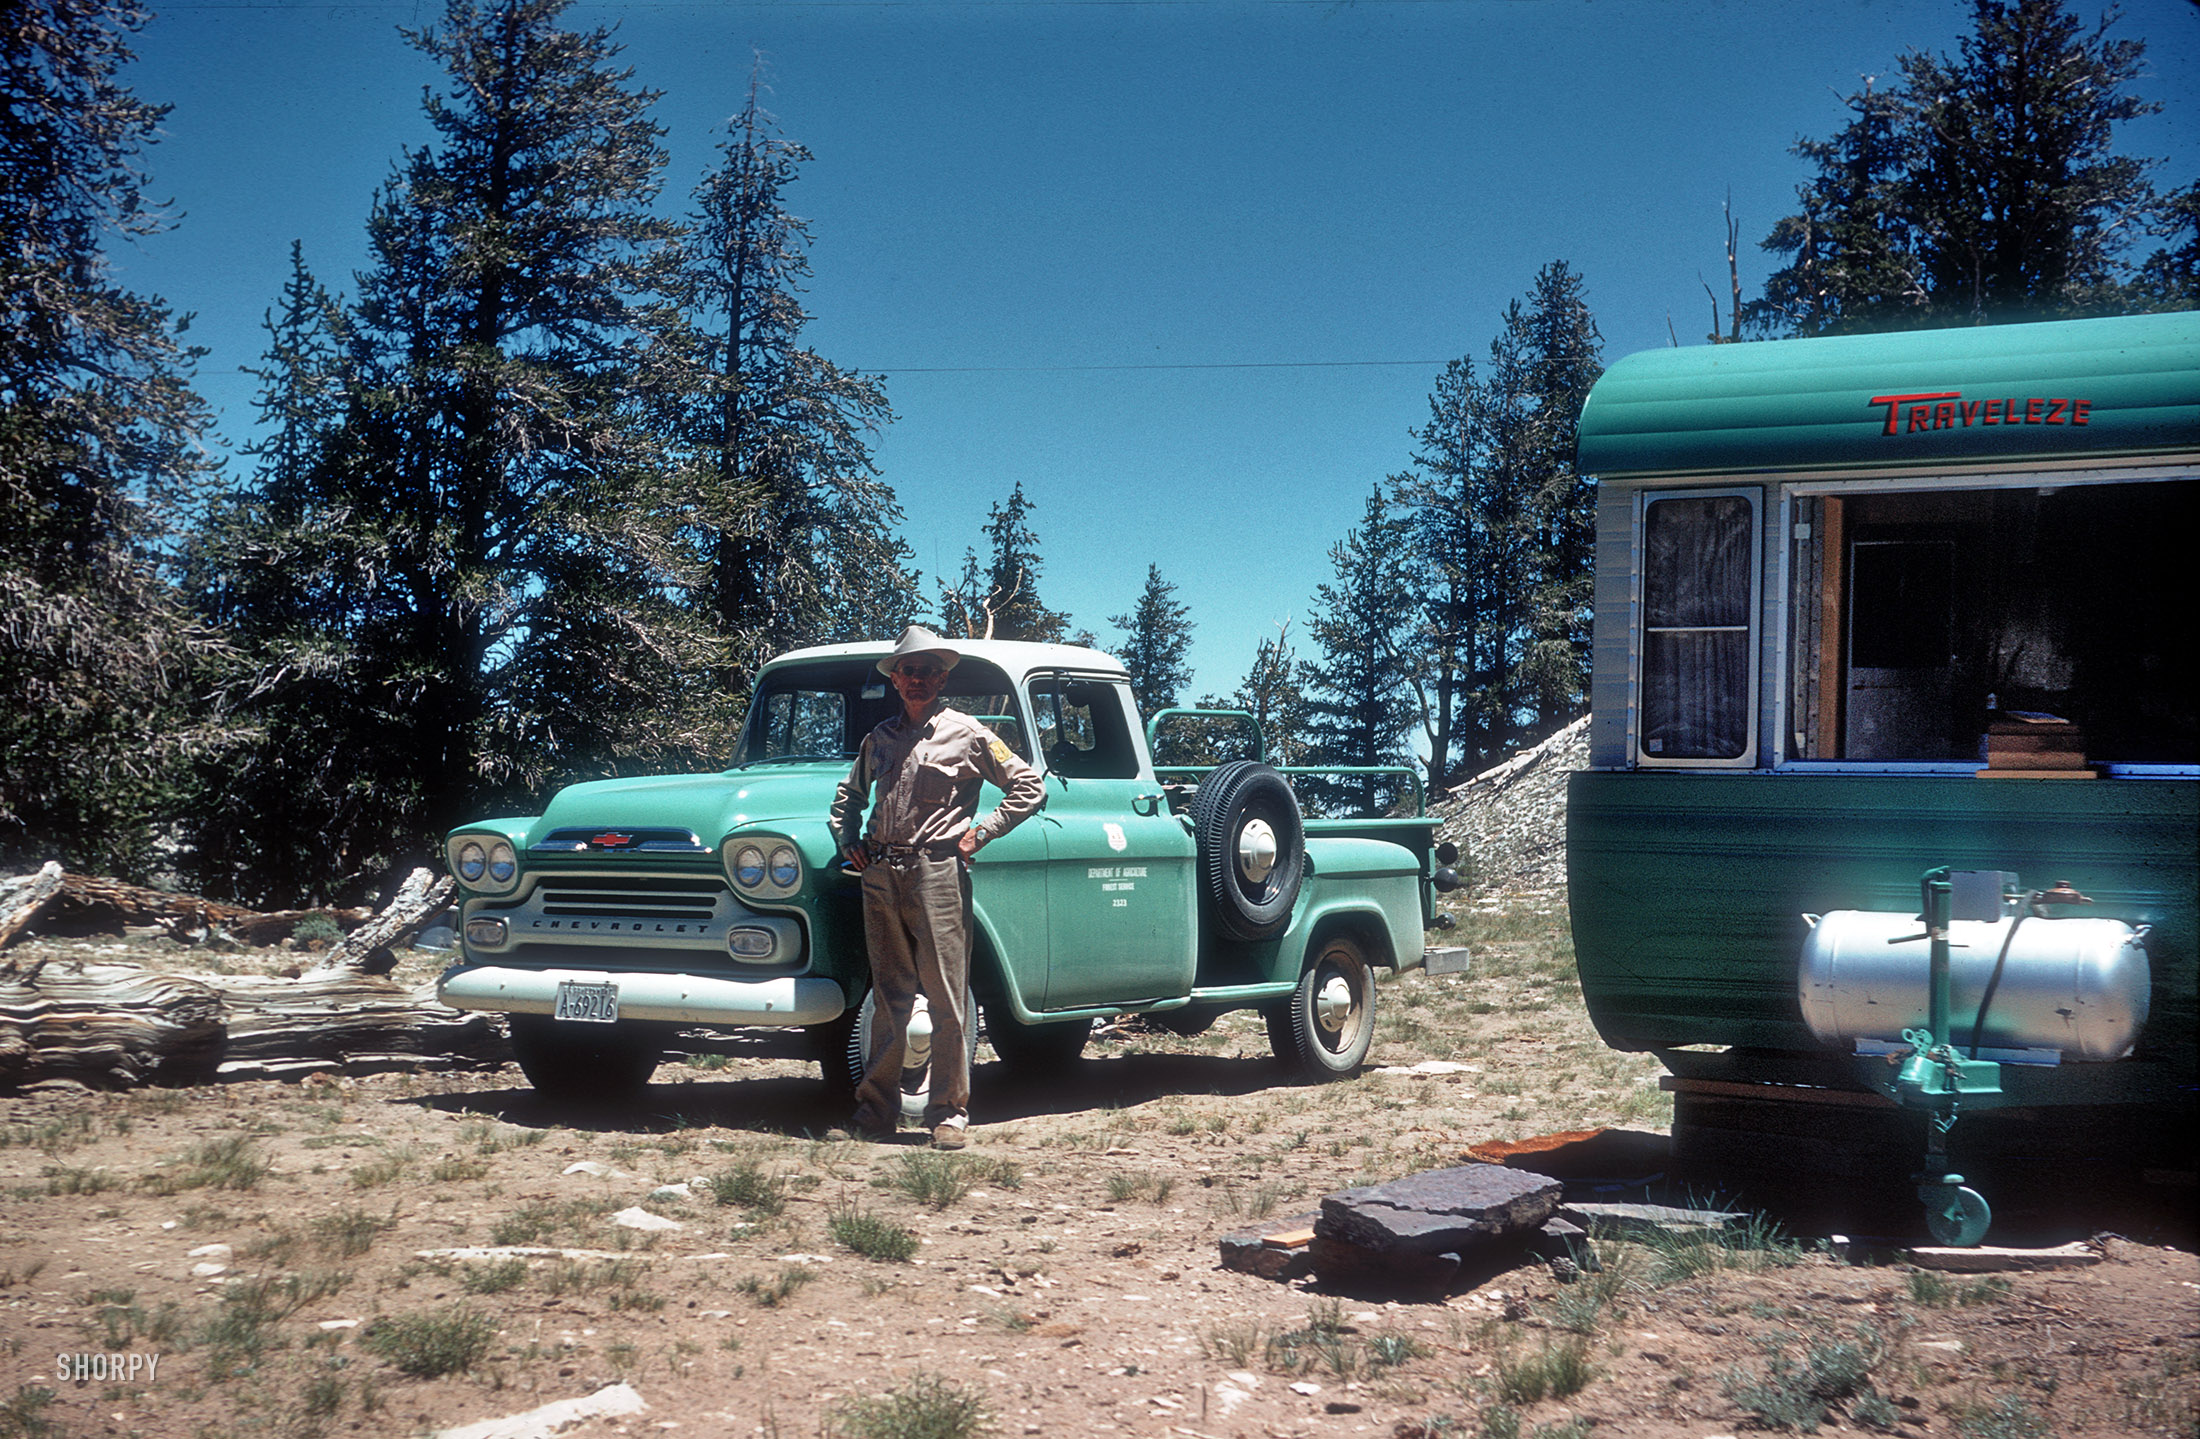 This 35mm Kodachrome found in a thrift store is dated August 1959 and bears the notation "Jim, Bristlecone." The color-coordinated Chevrolet truck and Traveleze trailer are a nice late-Fifties touch. View full size.